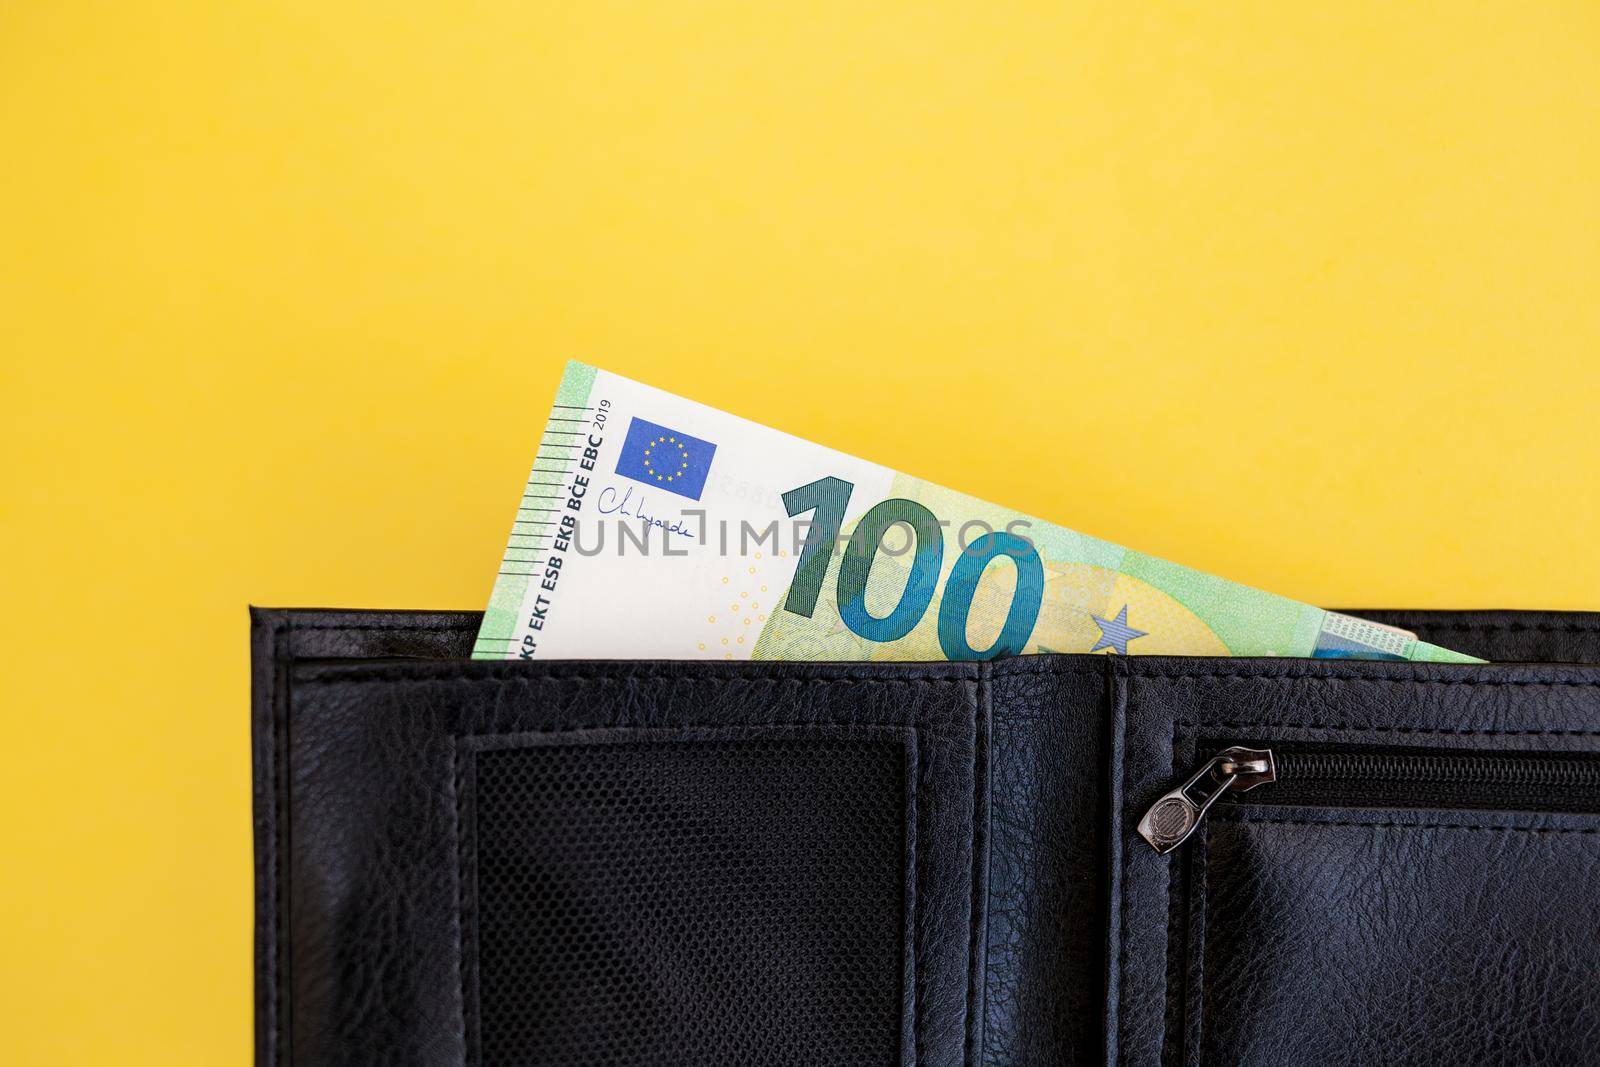 A hundred euro banknote sticks out of a black wallet on a yellow background. cash paper currency, payment, earning and savings, european currency, money and finance concep. space for text